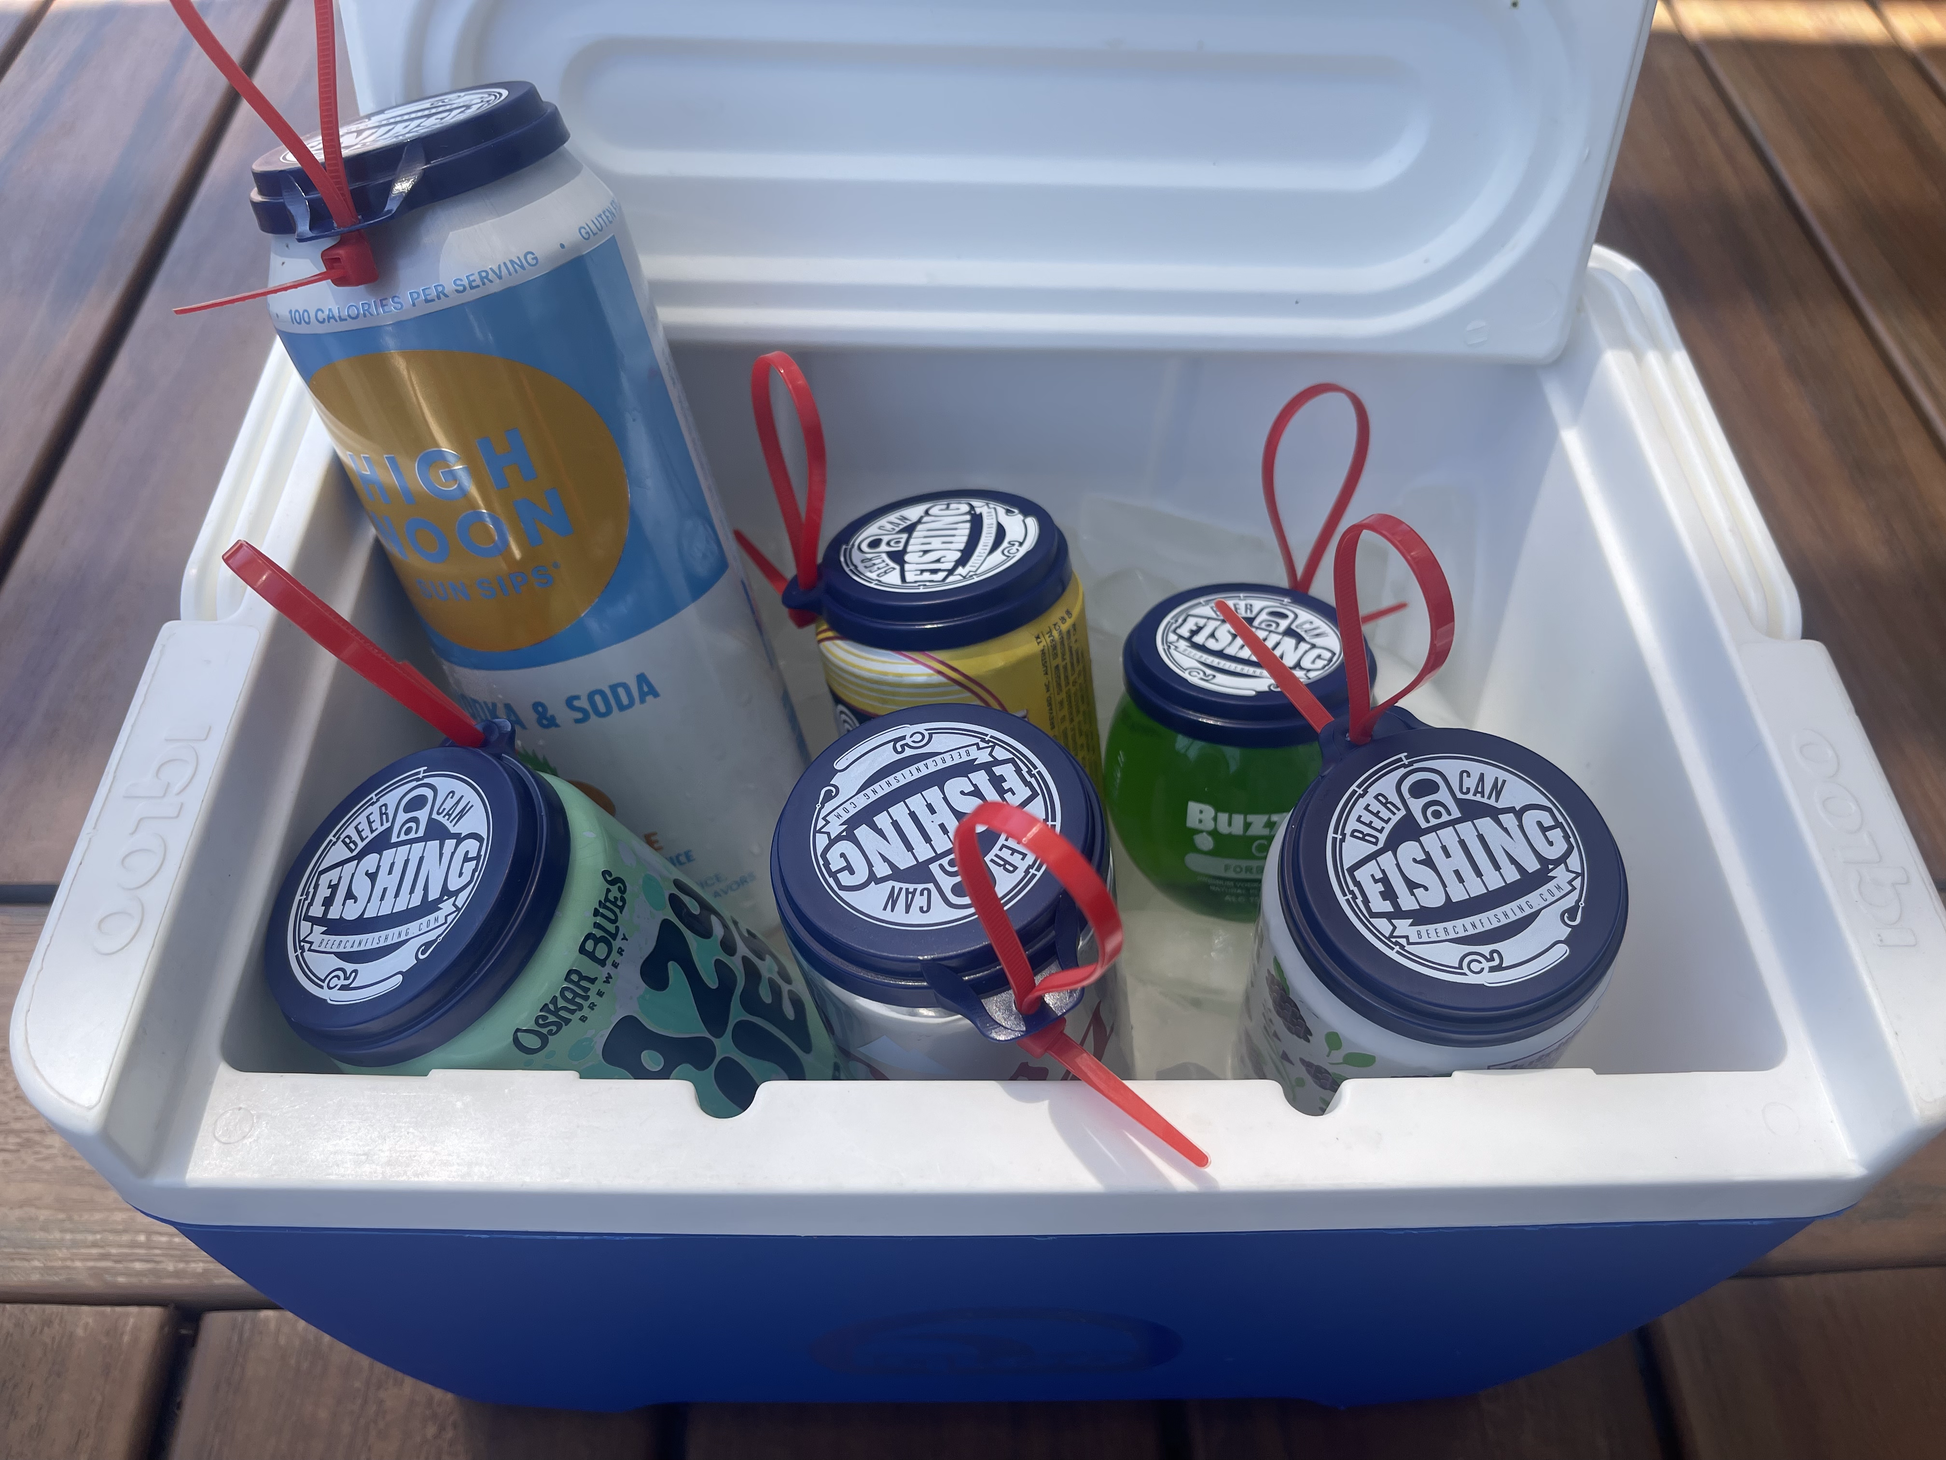 6 pack of beer can fishing game lids in a cooler